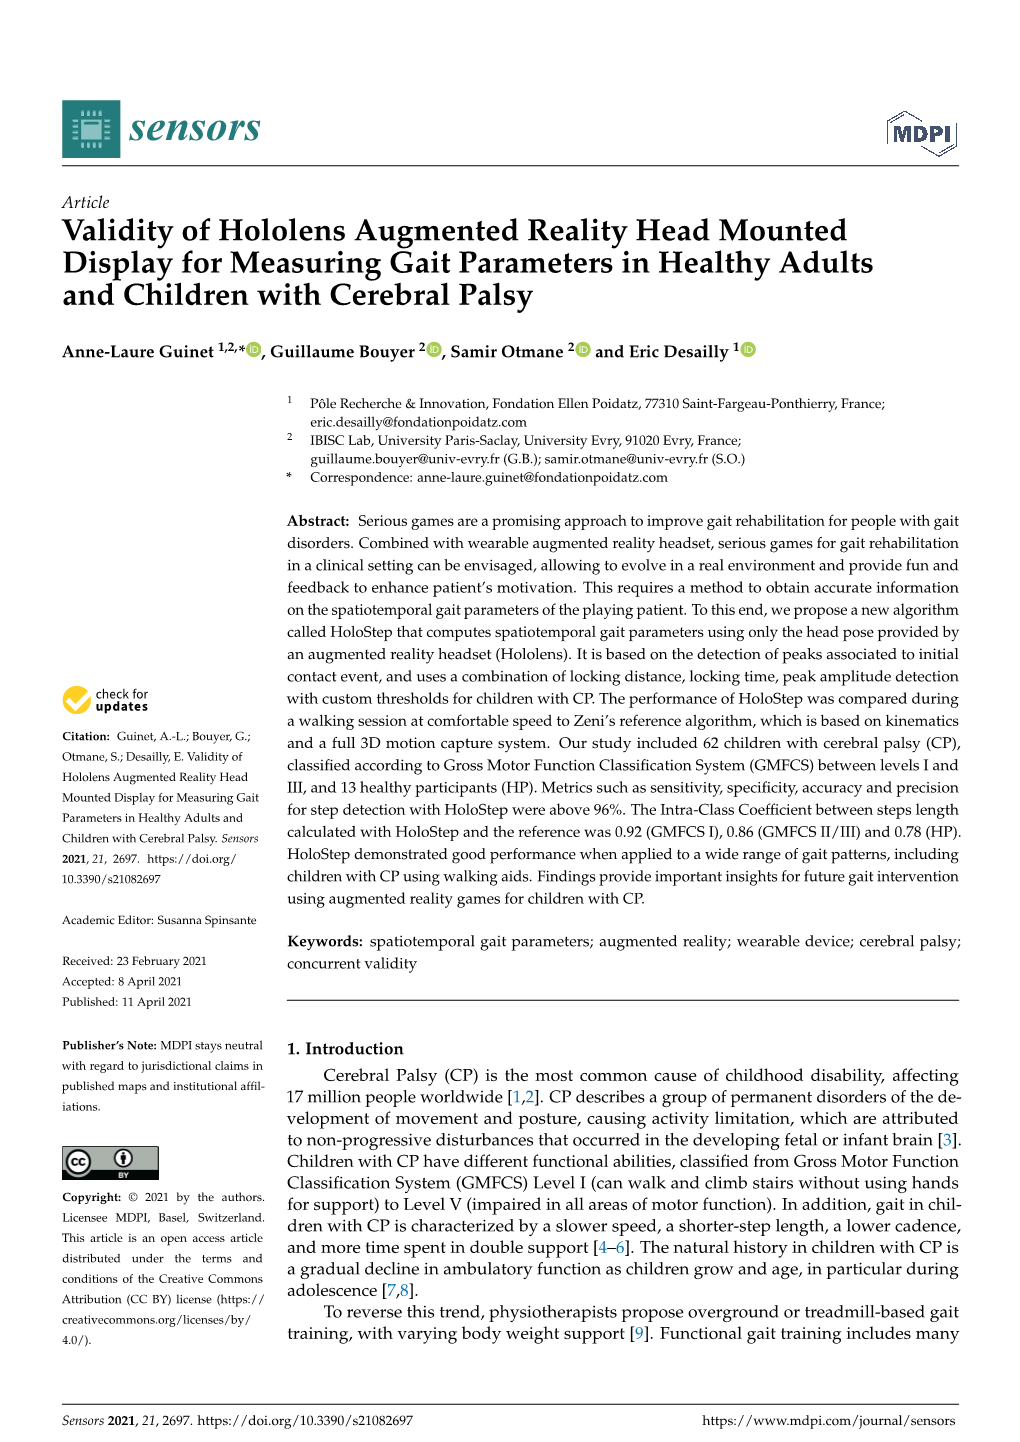 Validity of Hololens Augmented Reality Head Mounted Display for Measuring Gait Parameters in Healthy Adults and Children with Cerebral Palsy